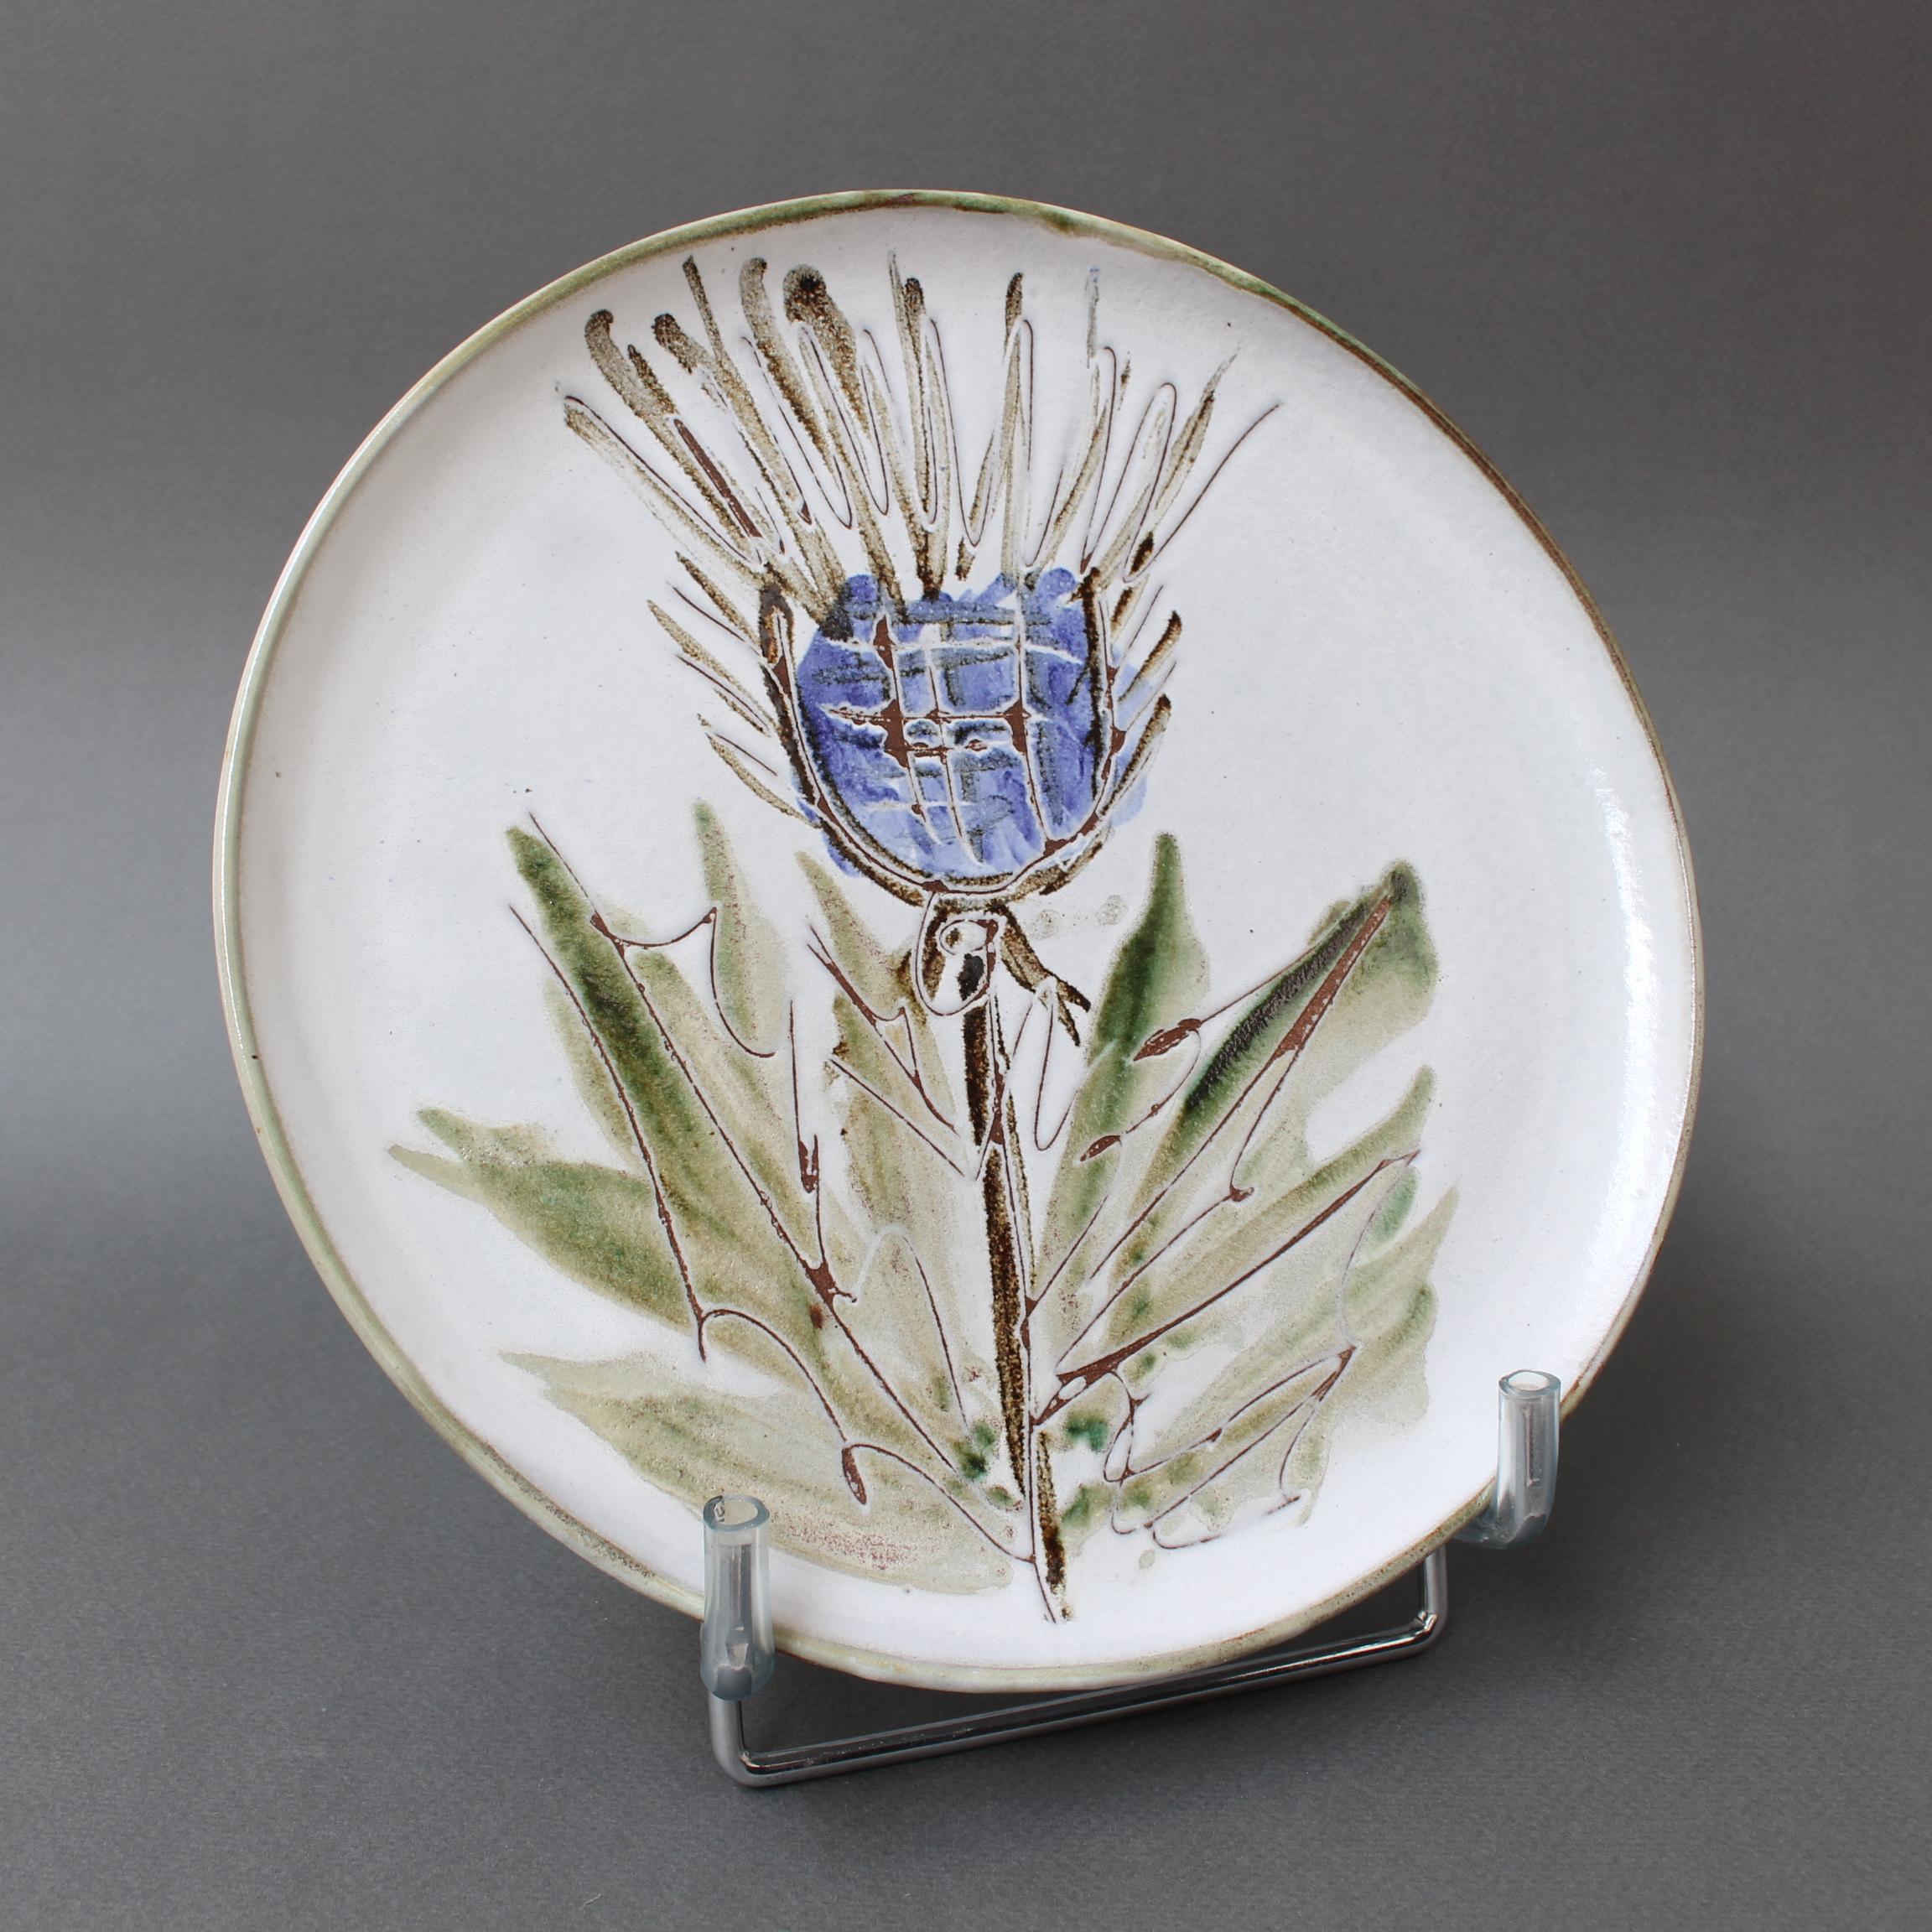 Mid-century decorative plate (circa 1960s) by Albert Thiry. A chalk-white glaze provides the background for a colourful thistle motif in the centre recess of this small dish. The incised plant has depth and adds a tactile element to the piece. The